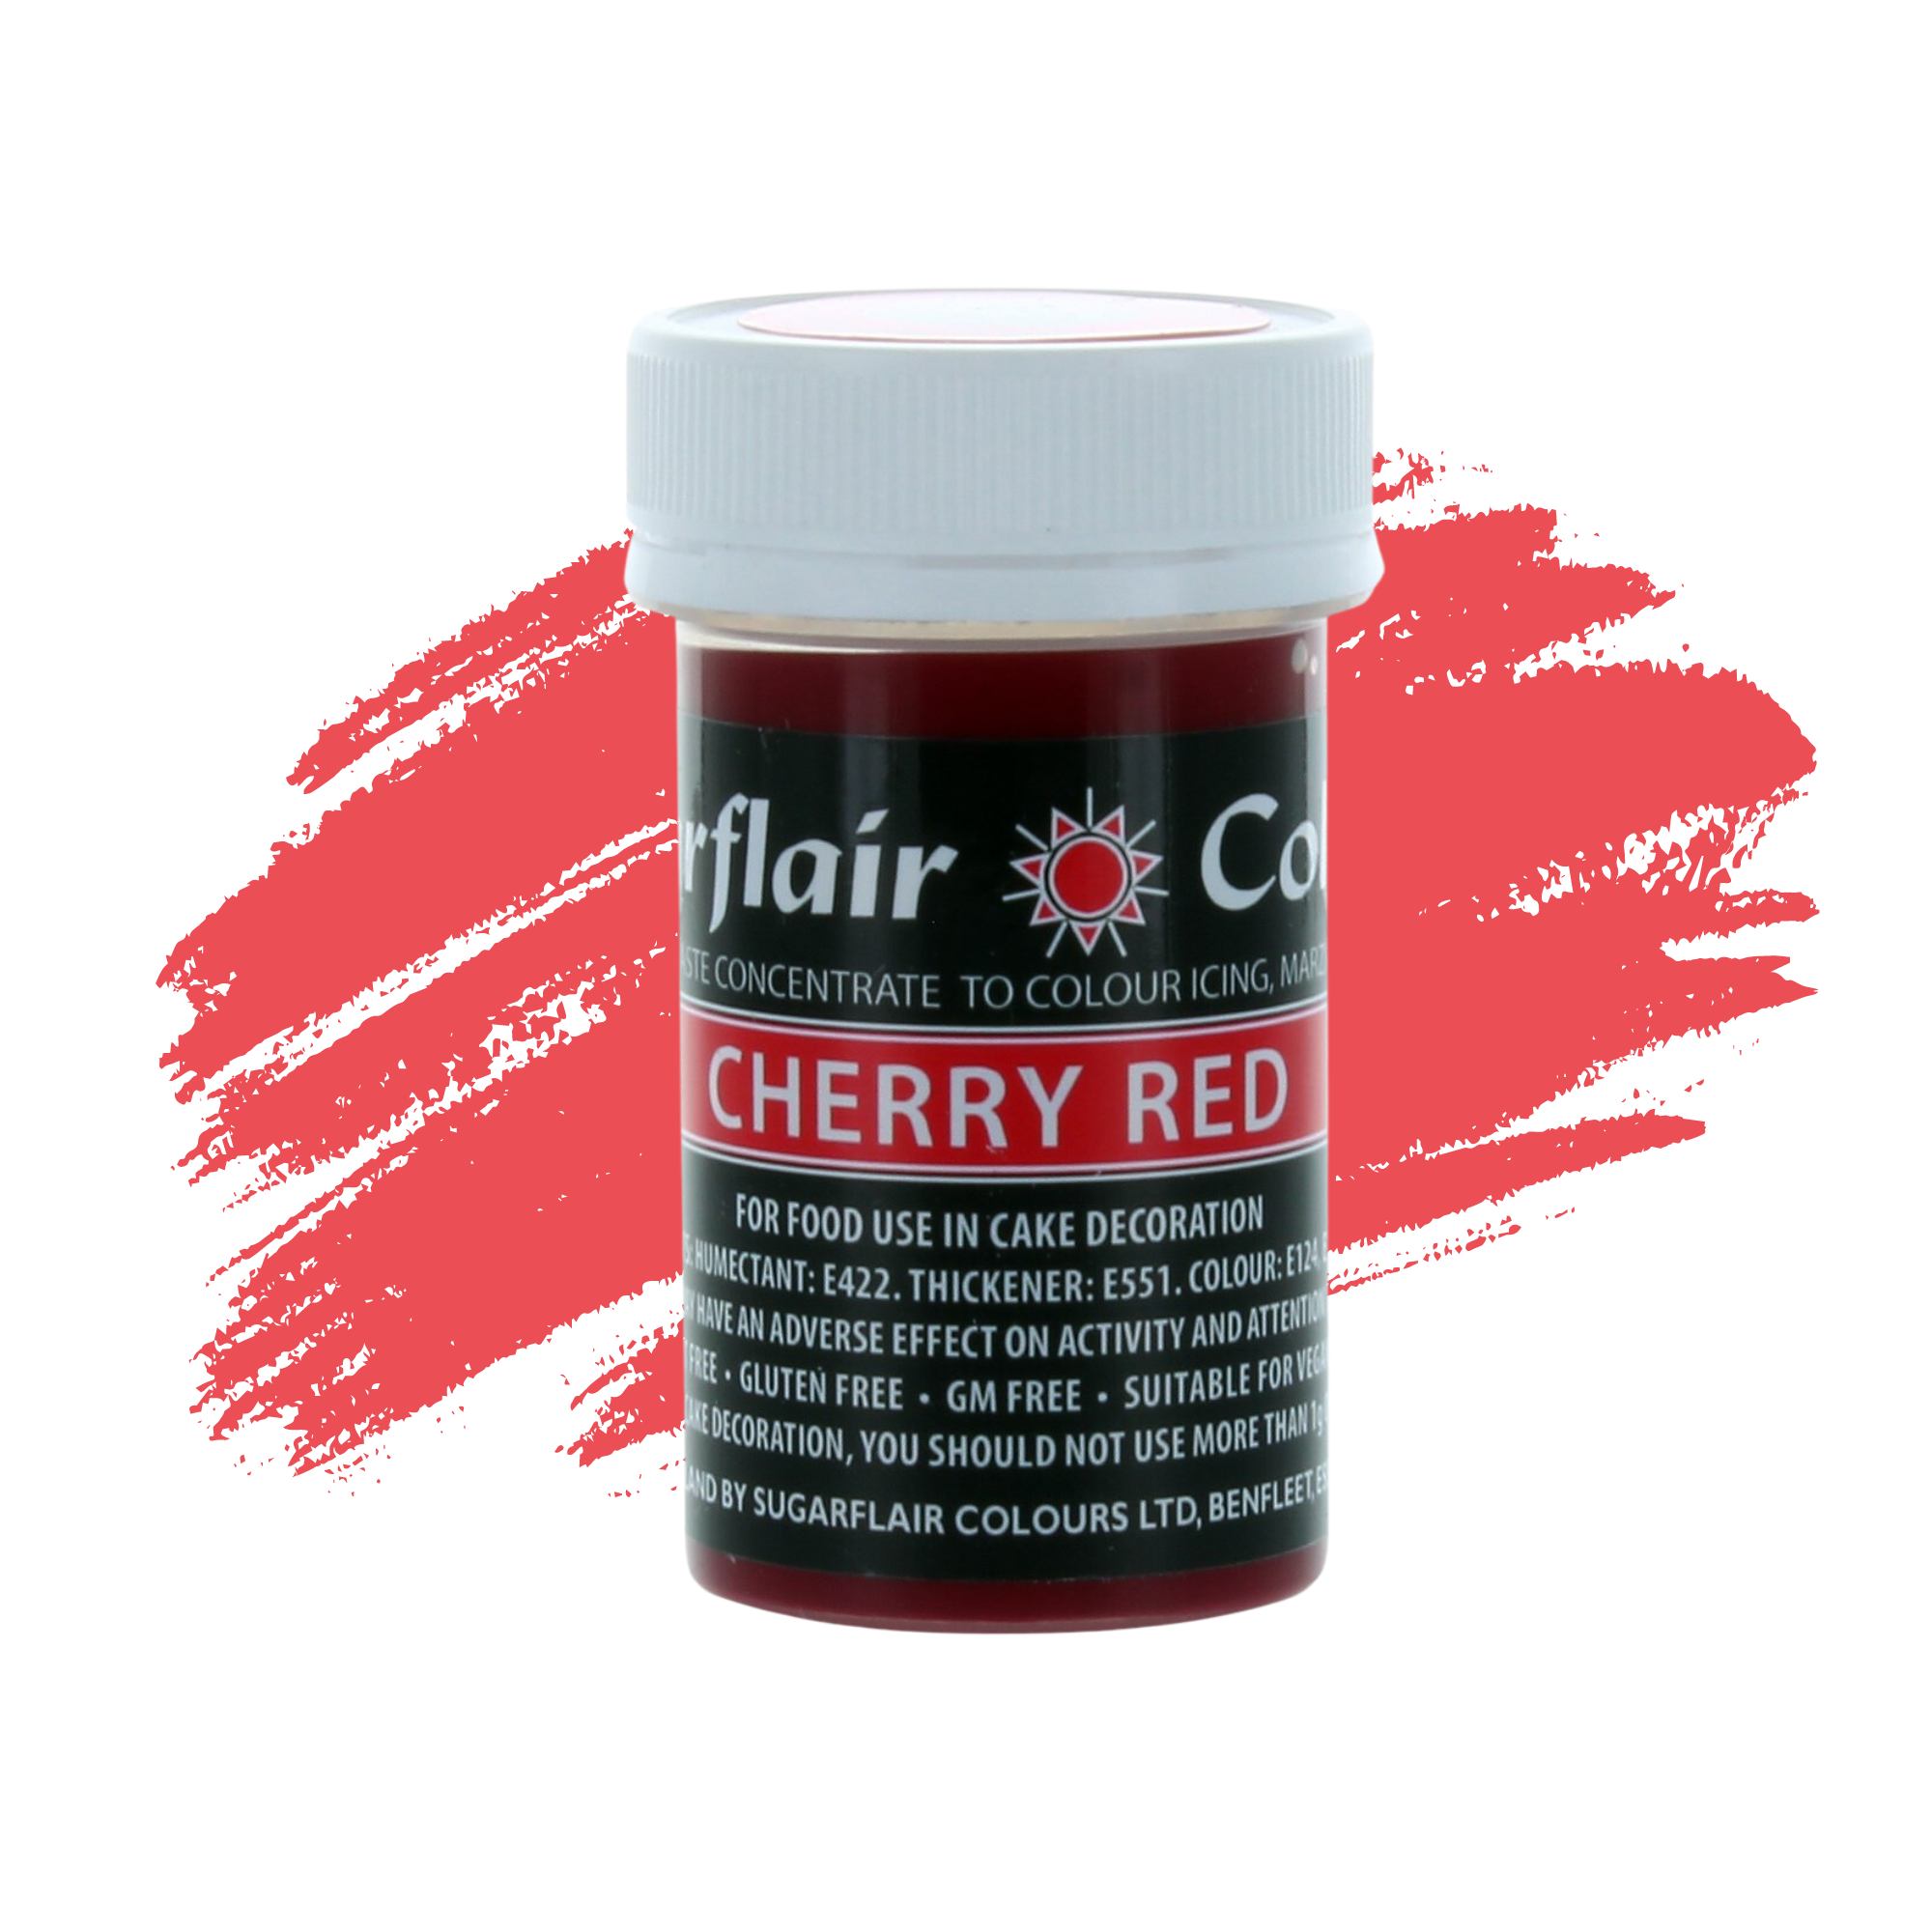 Sugarflair Paste Colours Concentrated Food Colouring - Pastel Cherry Red - 25g